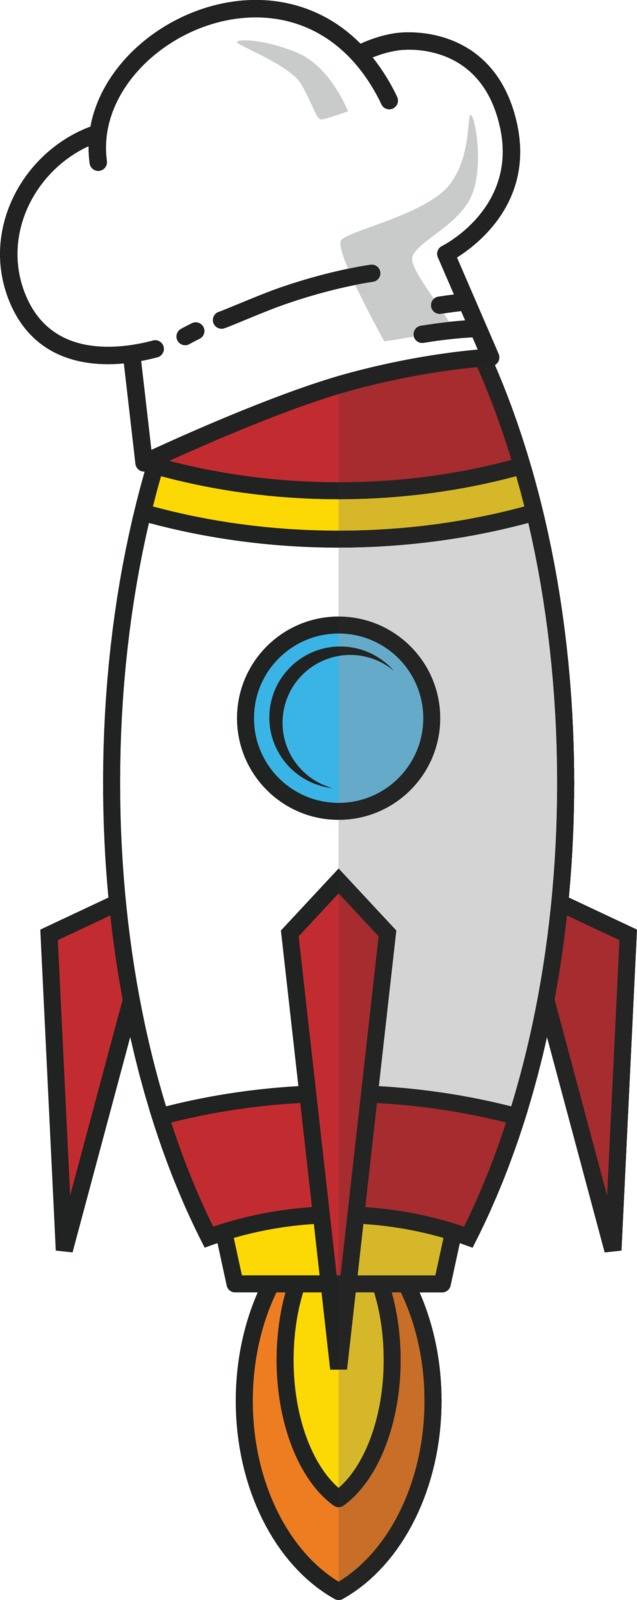 master chef rocket ship hat theme logo vector by vector1st